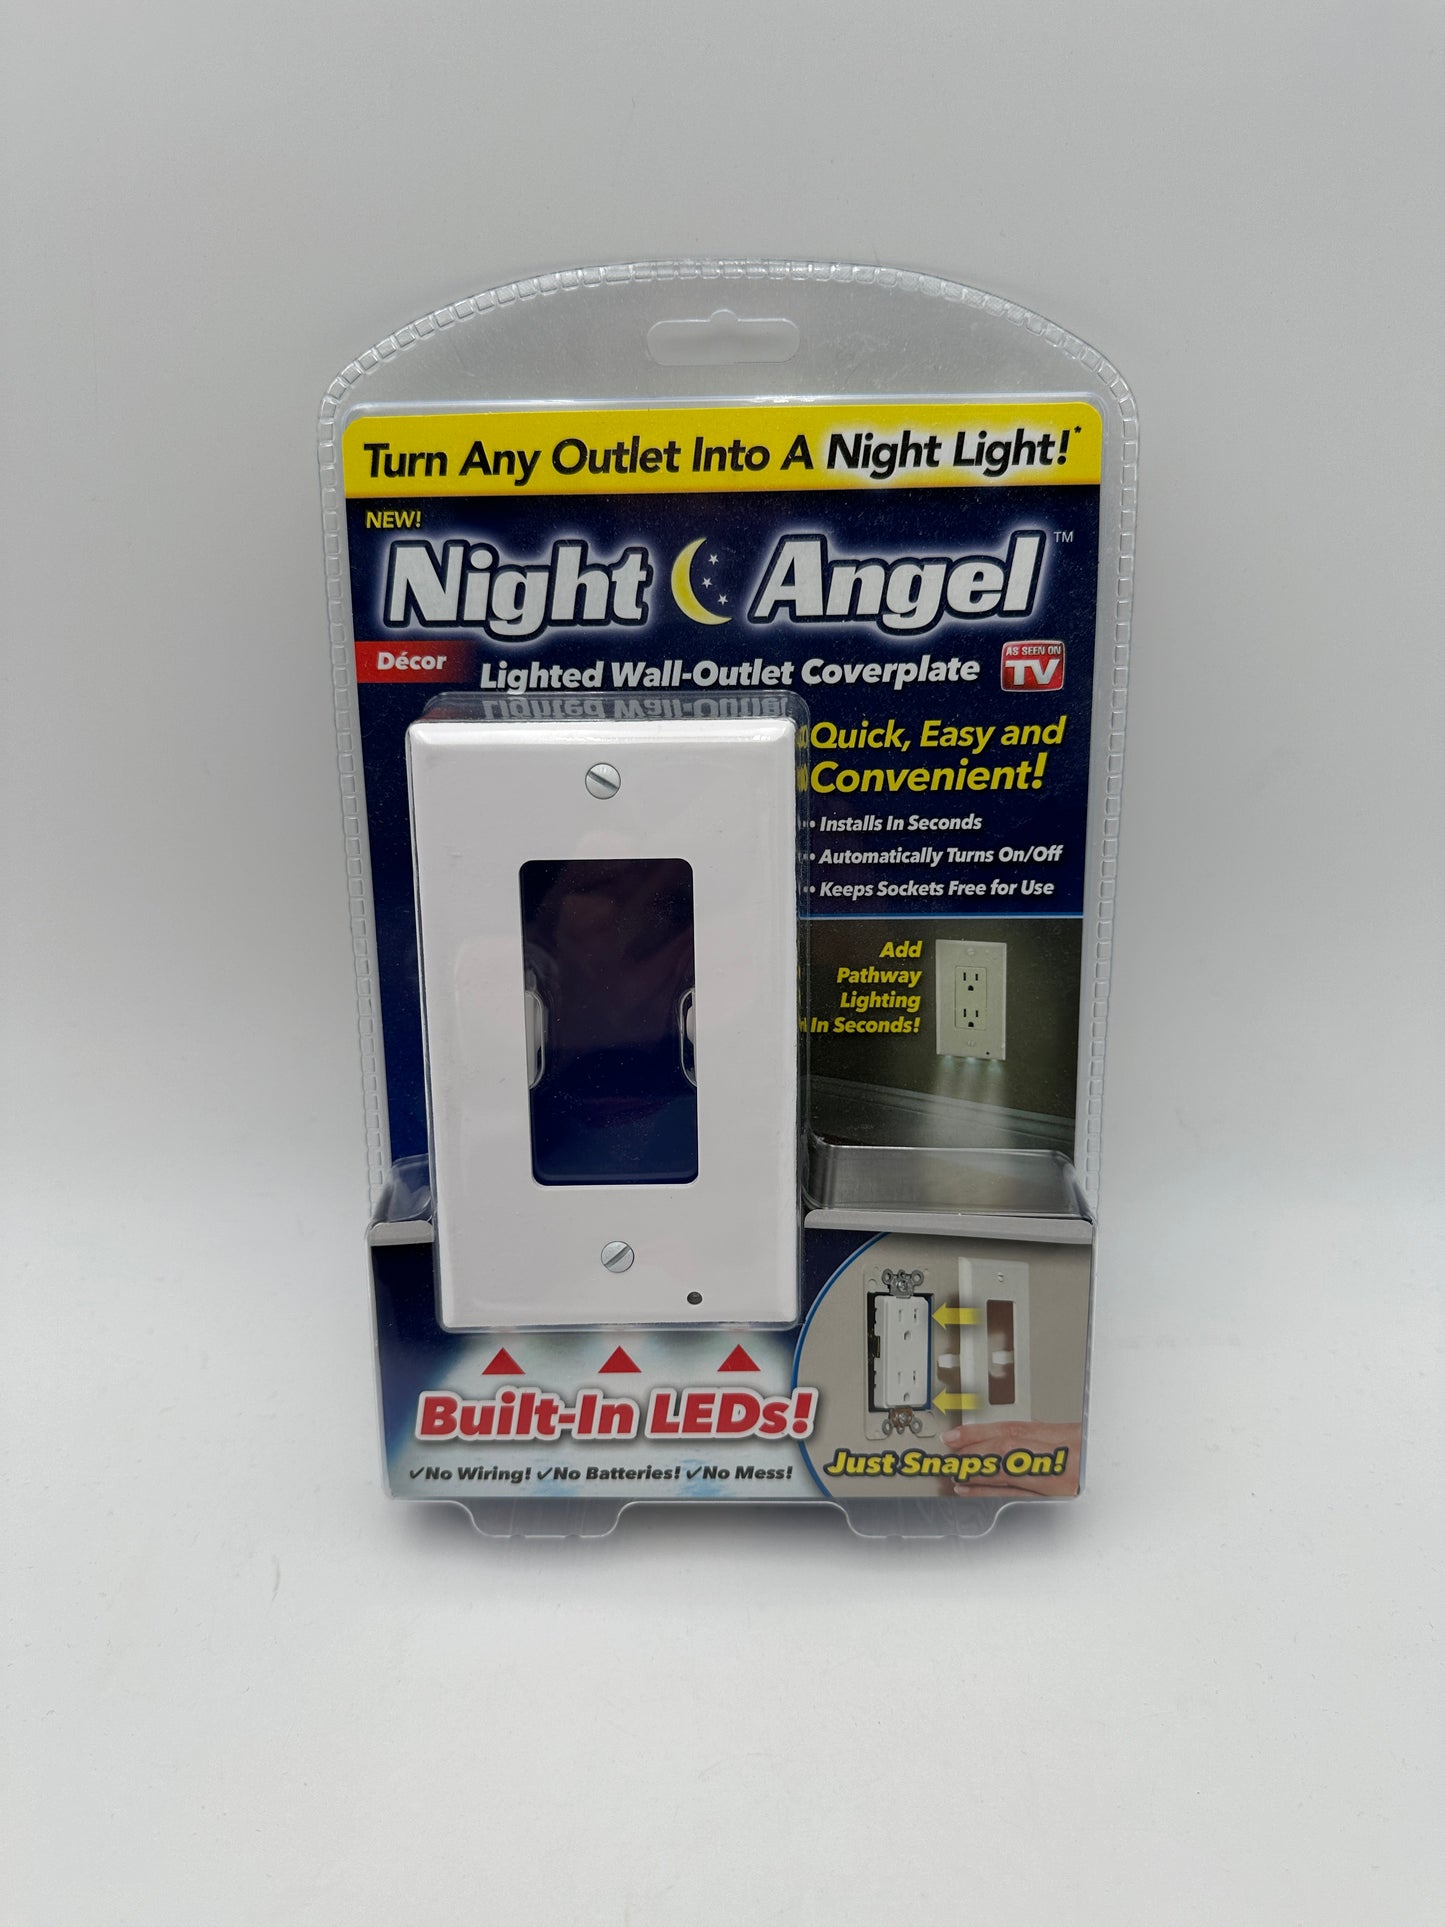 Ontel Products Night Angel Lighted Wall-Outlet Coverplate, new (currently have qty 2)